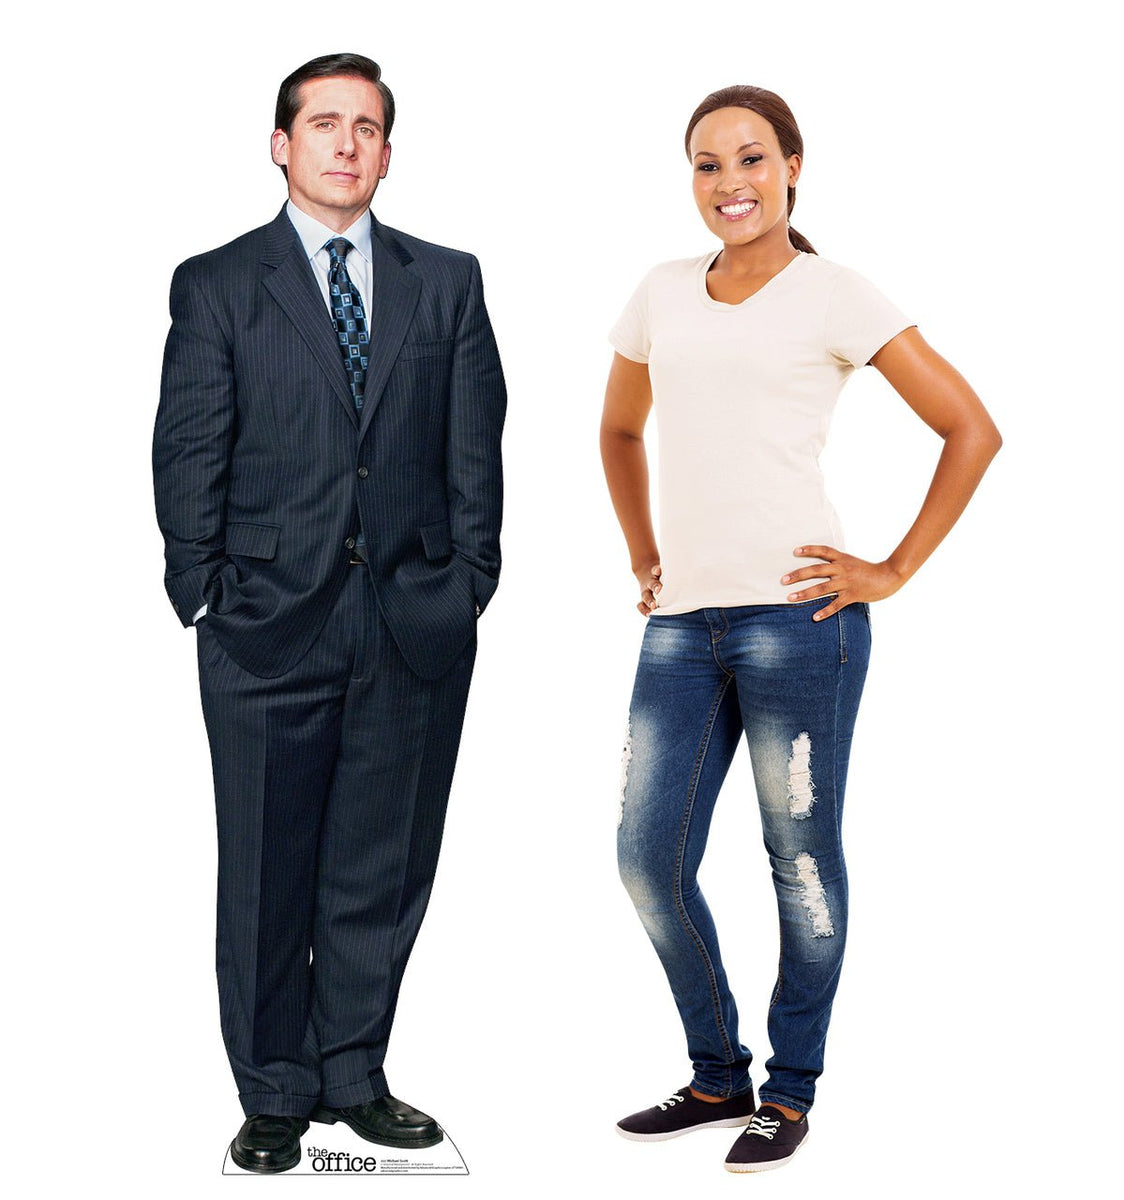 Michael Scott - The Office Cardboard Cutout – Prime Party